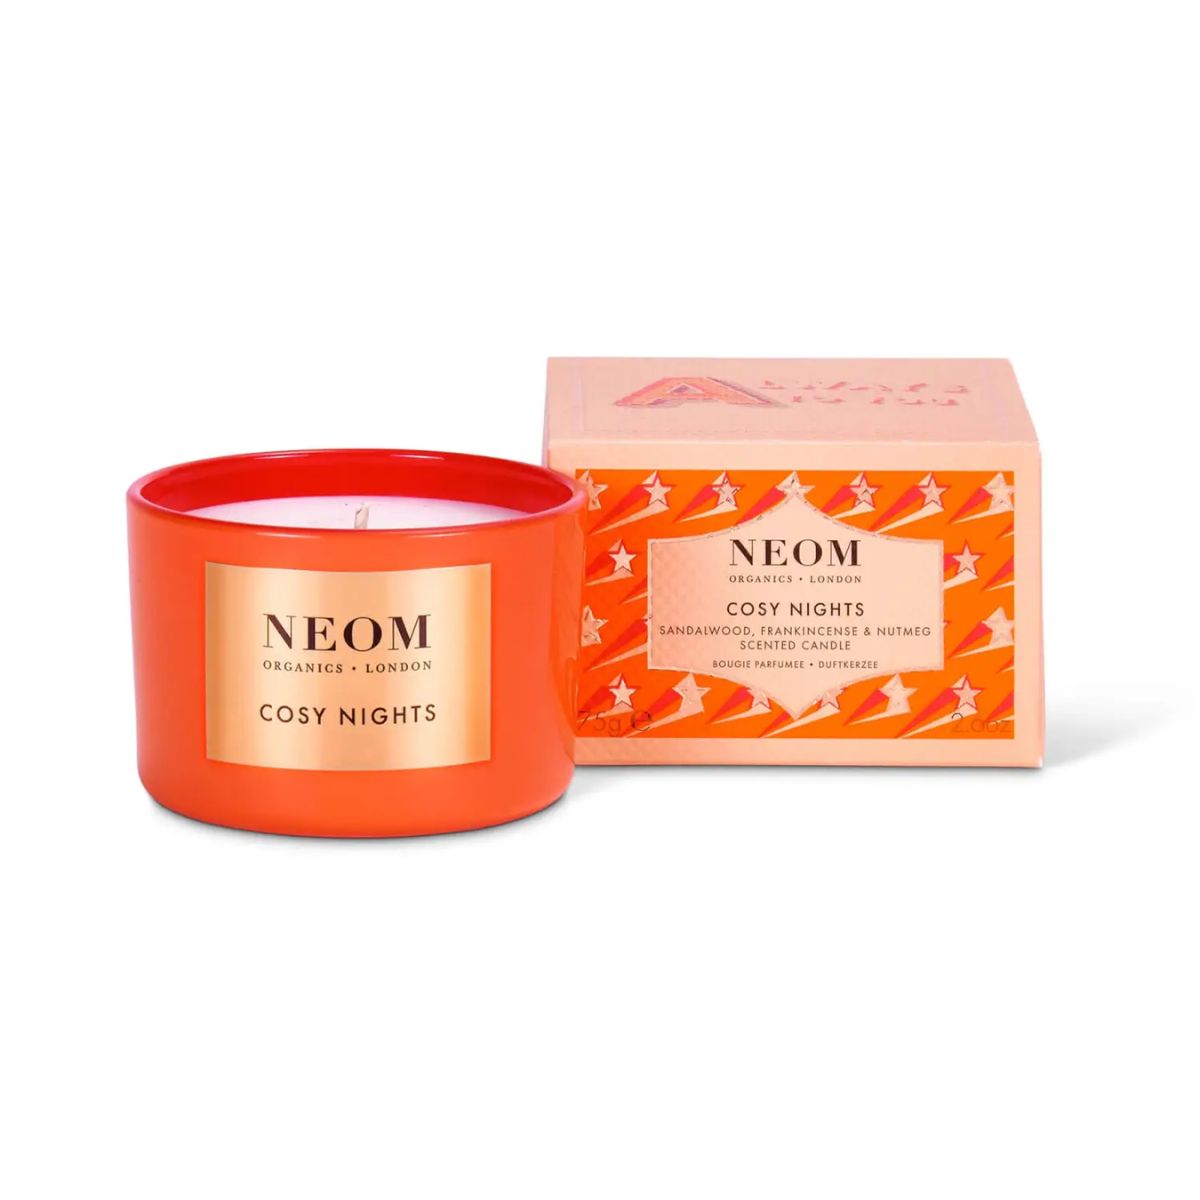 Neom Cosy Nights Travel Size Candle